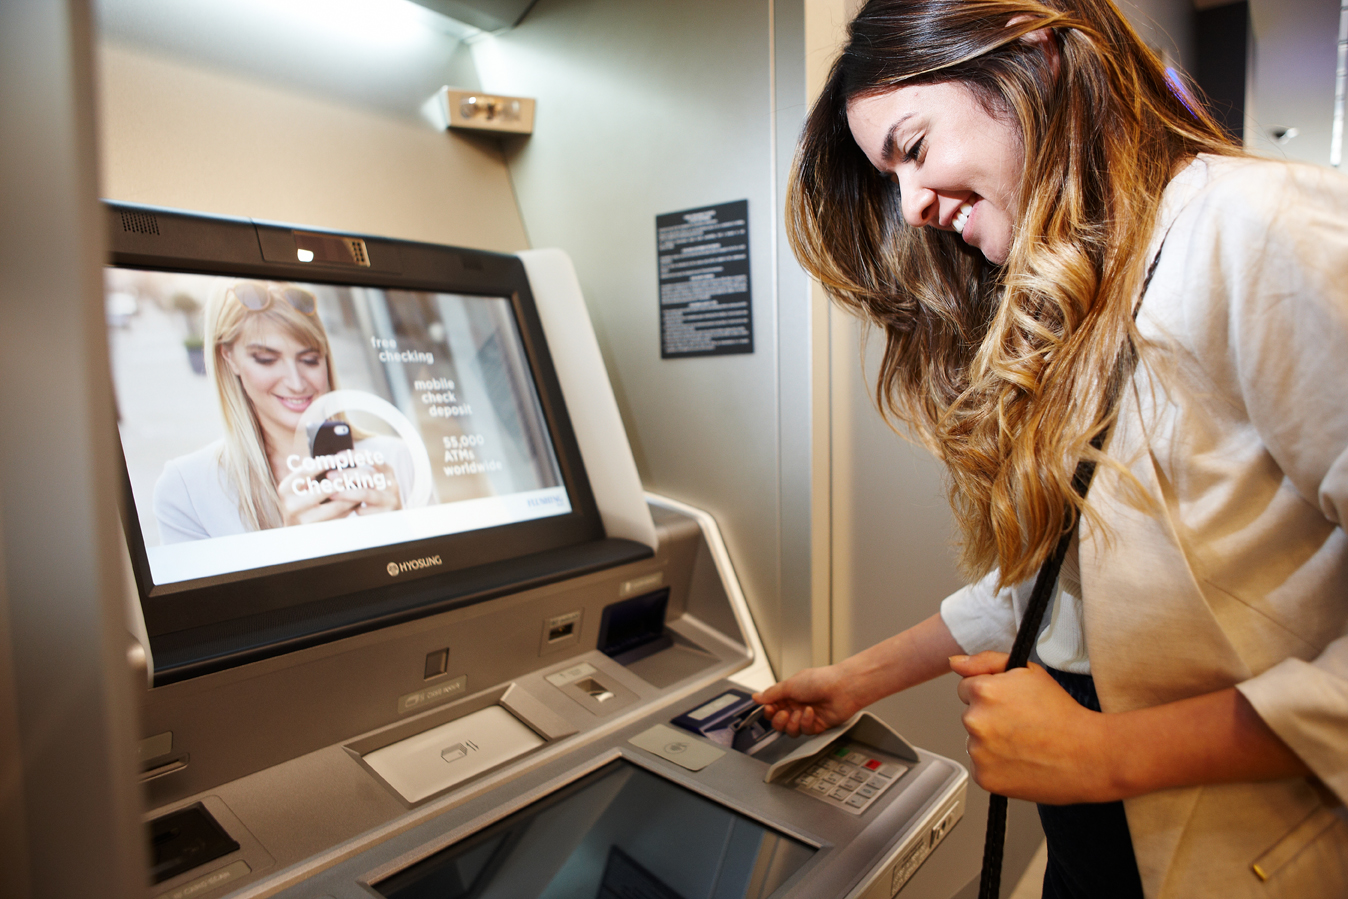 ATMs and security solutions for financial institutions